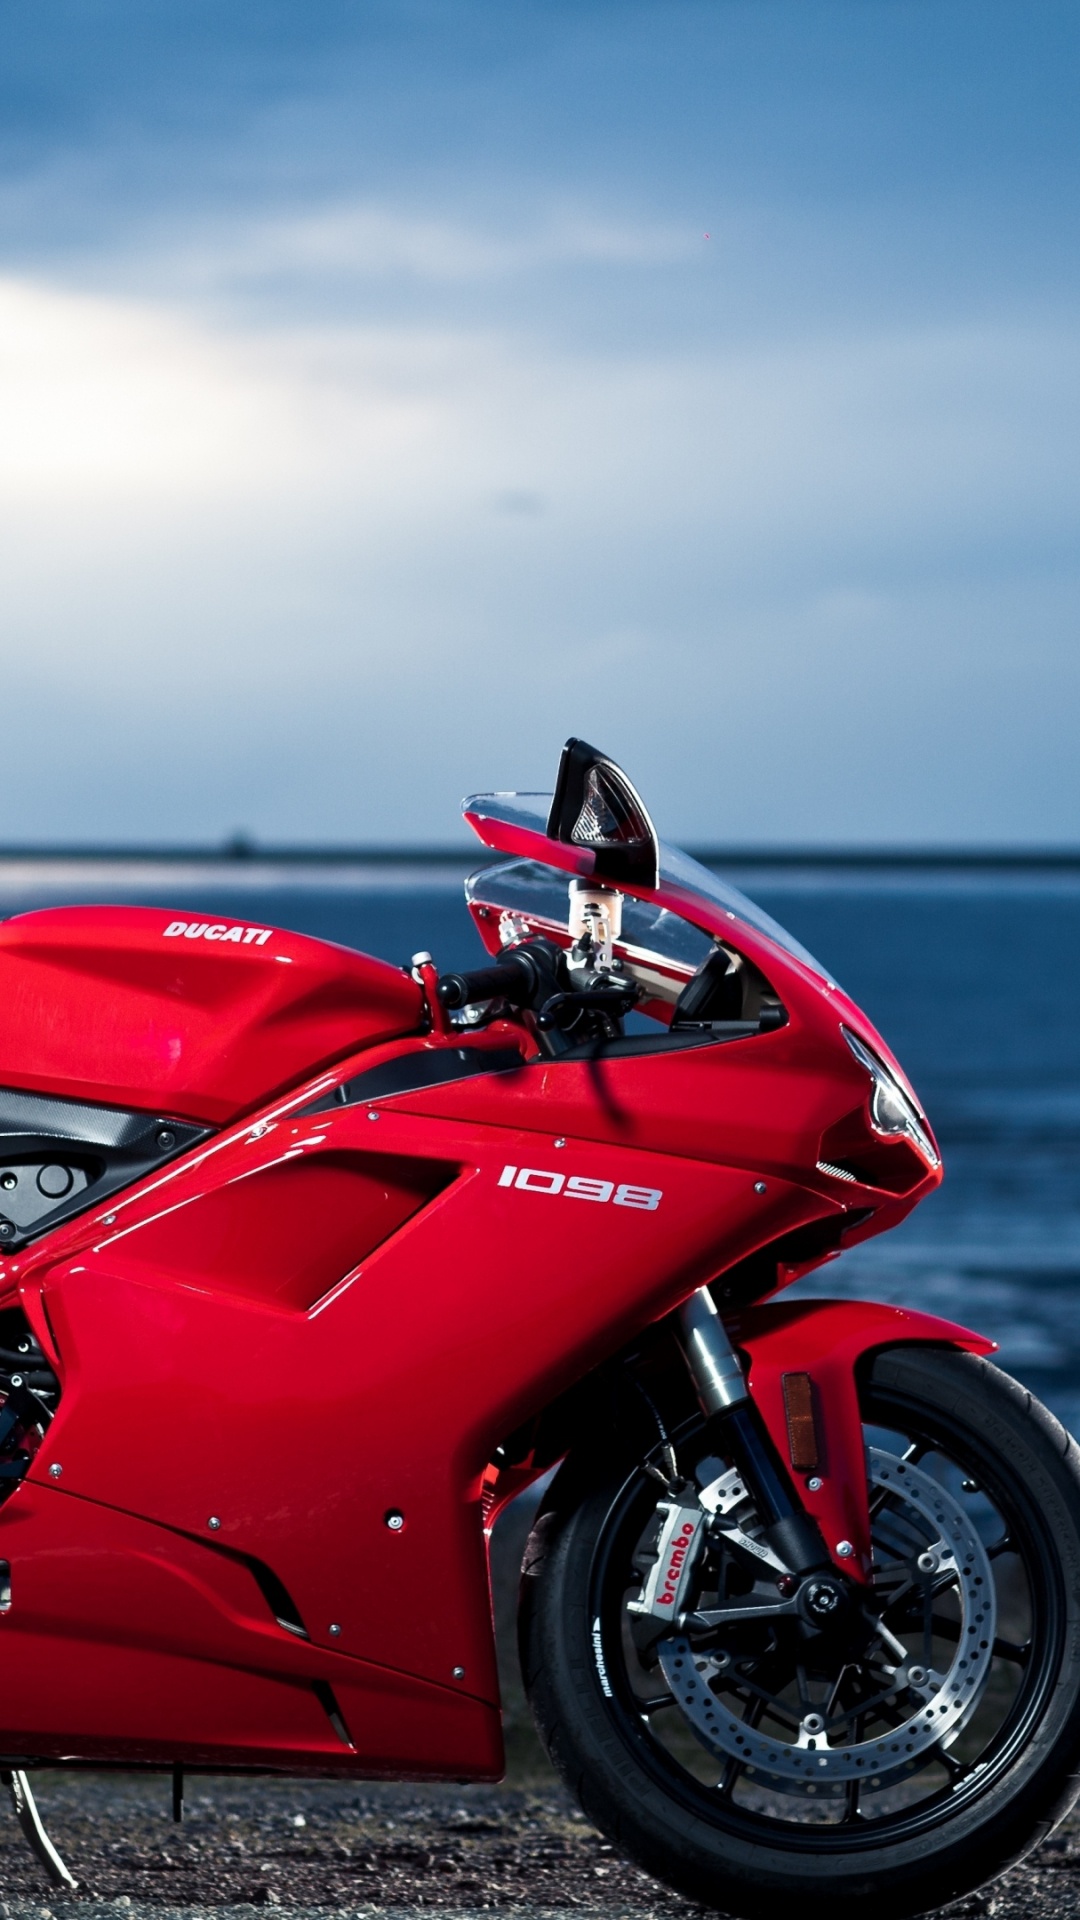 Red and Black Sports Bike Parked on Seashore During Daytime. Wallpaper in 1080x1920 Resolution